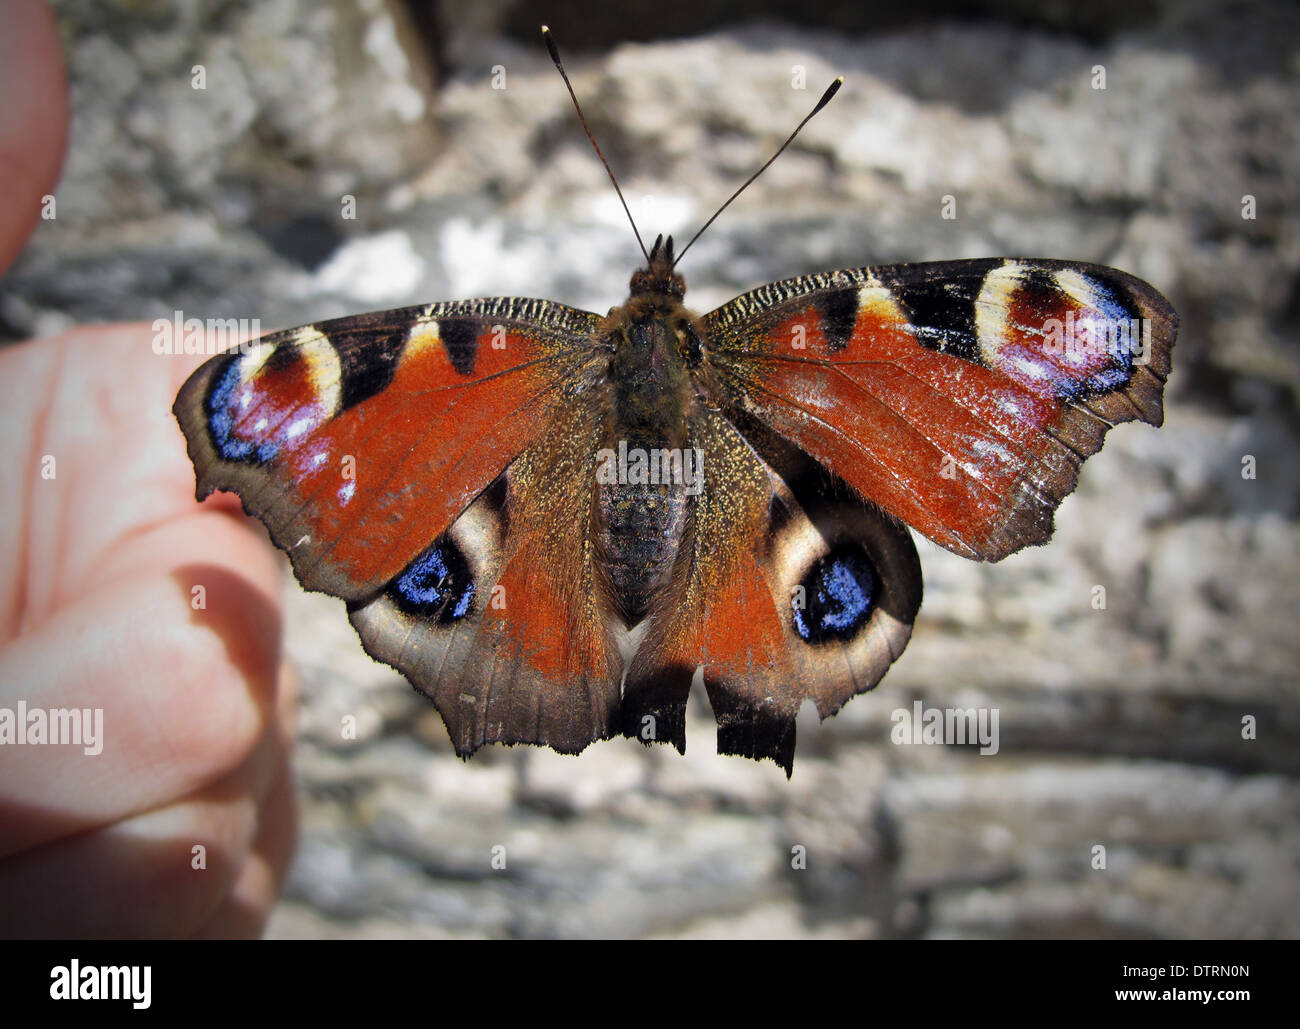 Peacock Butterfly On hand Stock Photo